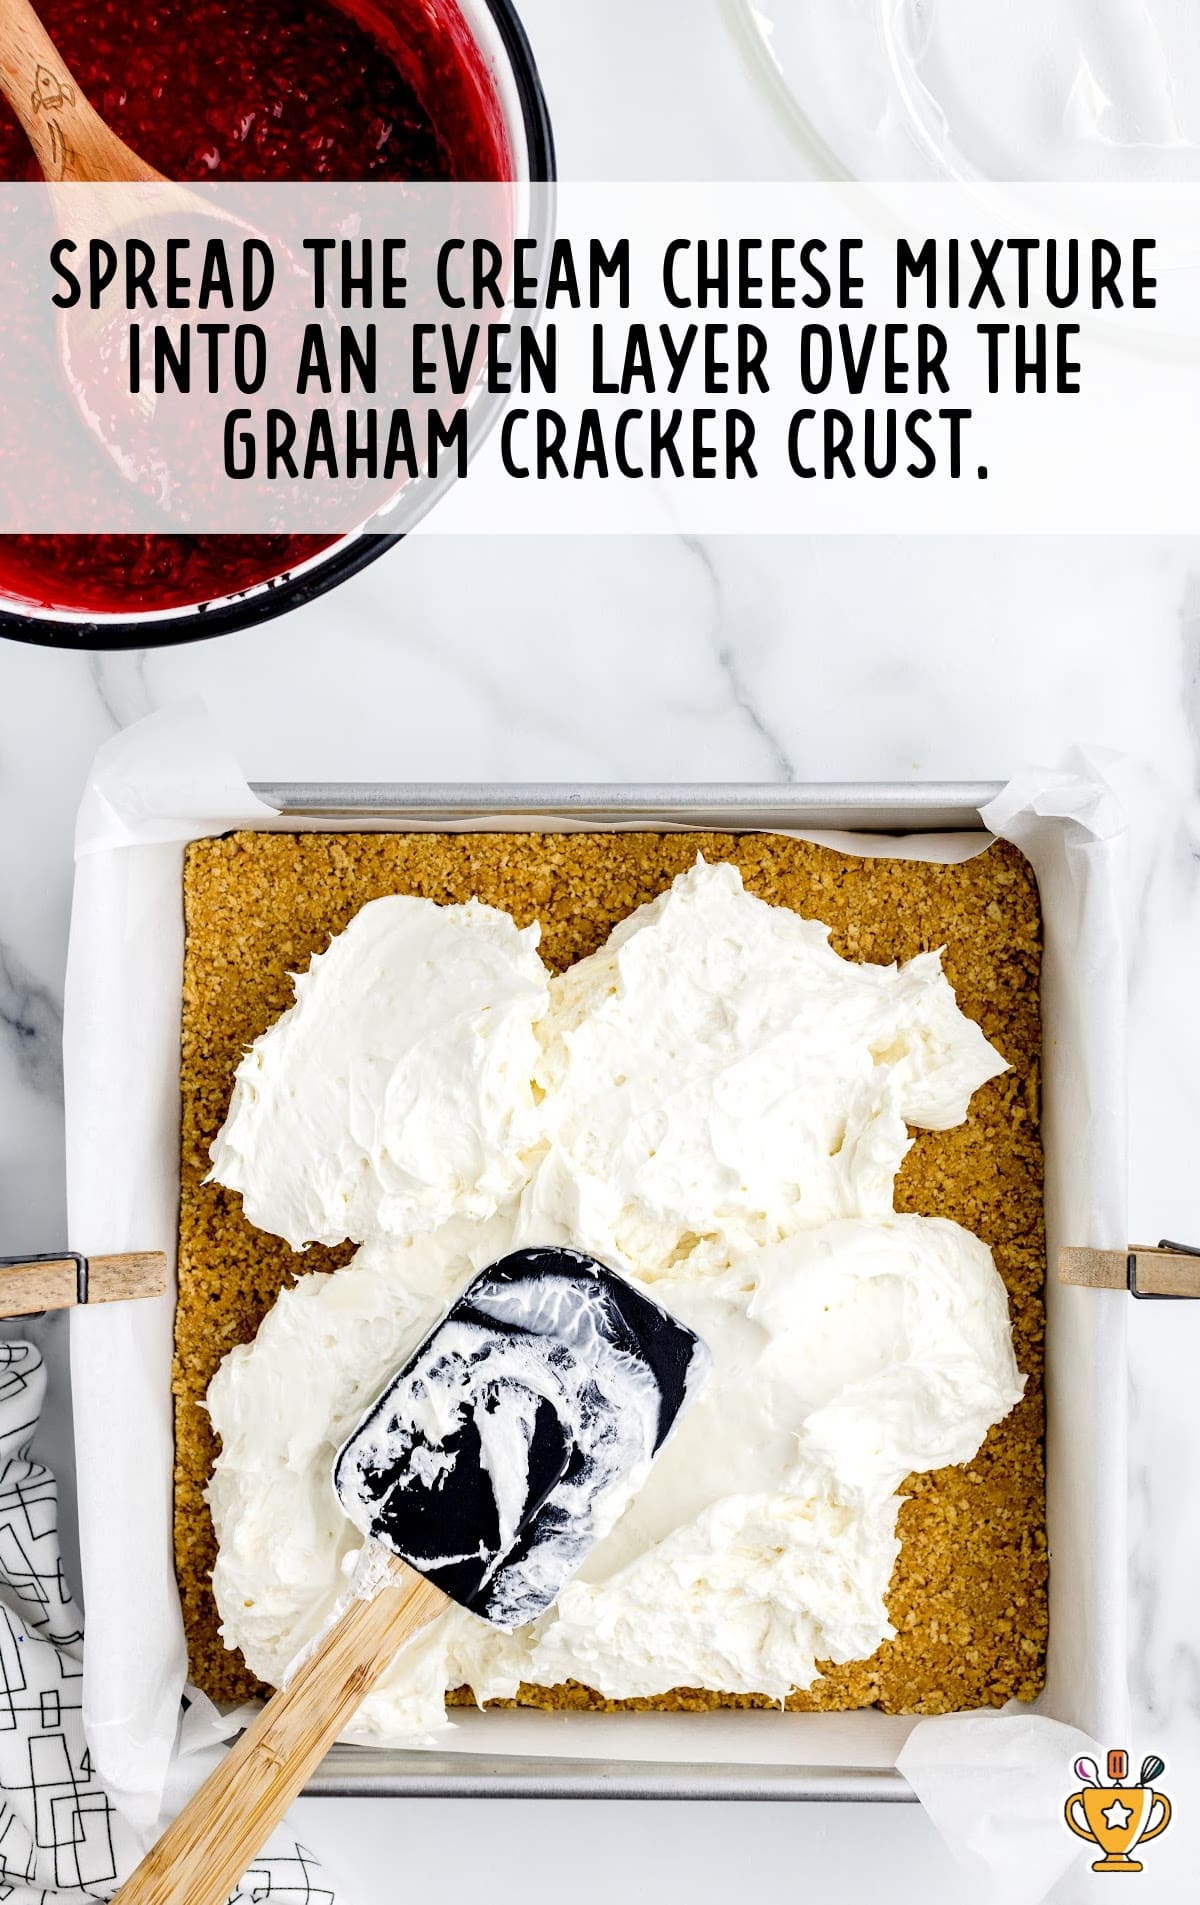 cream cheese mixture spread into the even layer over the graham cracker crust in a baking dish